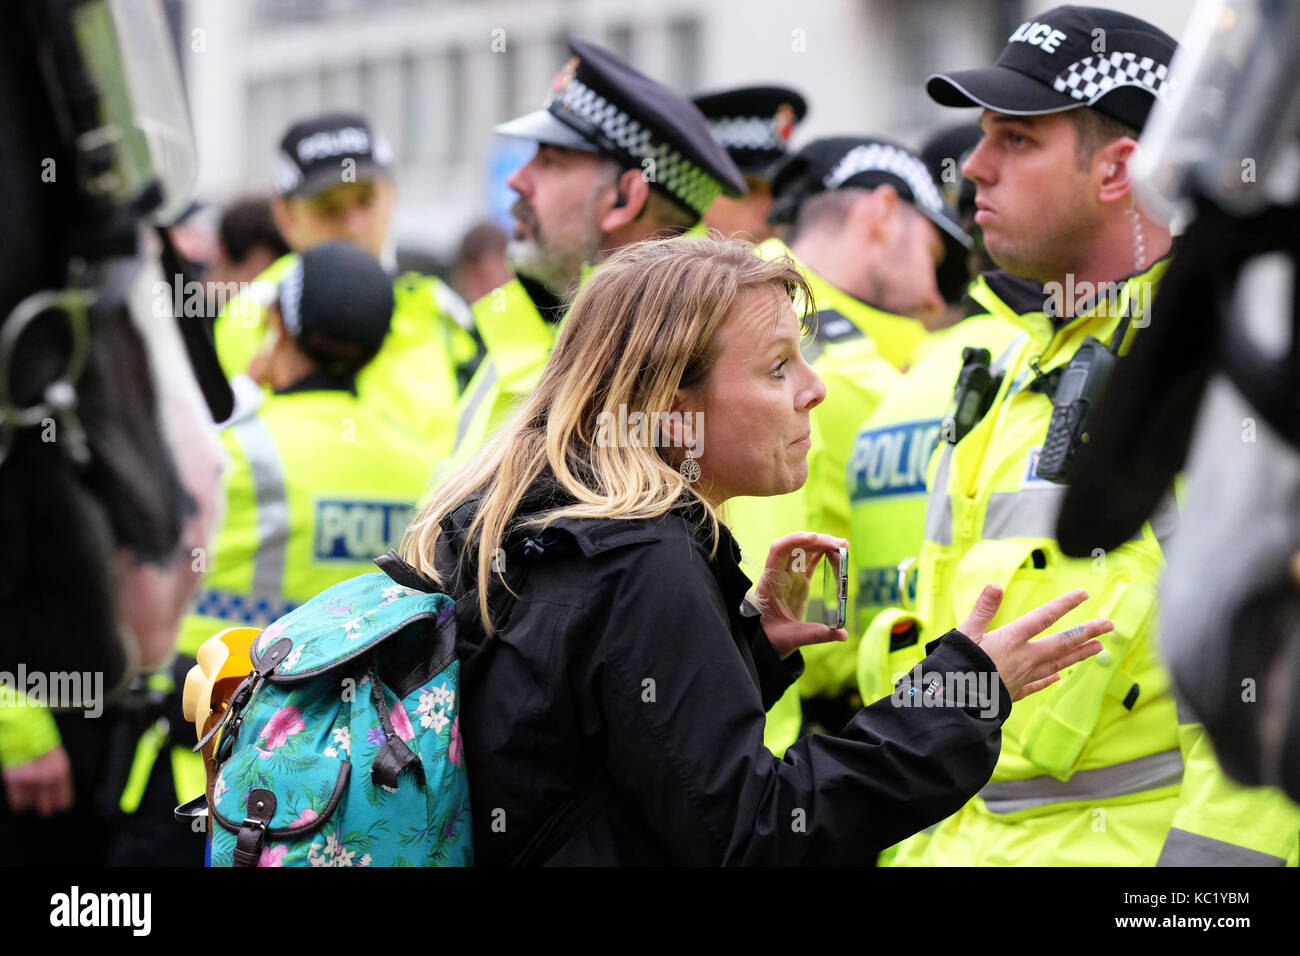 St Peters Square, Manchester, UK - Sunday 1st October 2017 - A protester talks to a line of Police officers outside the Conservative Party Conference. Photo Steven May / Alamy Live News Stock Photo